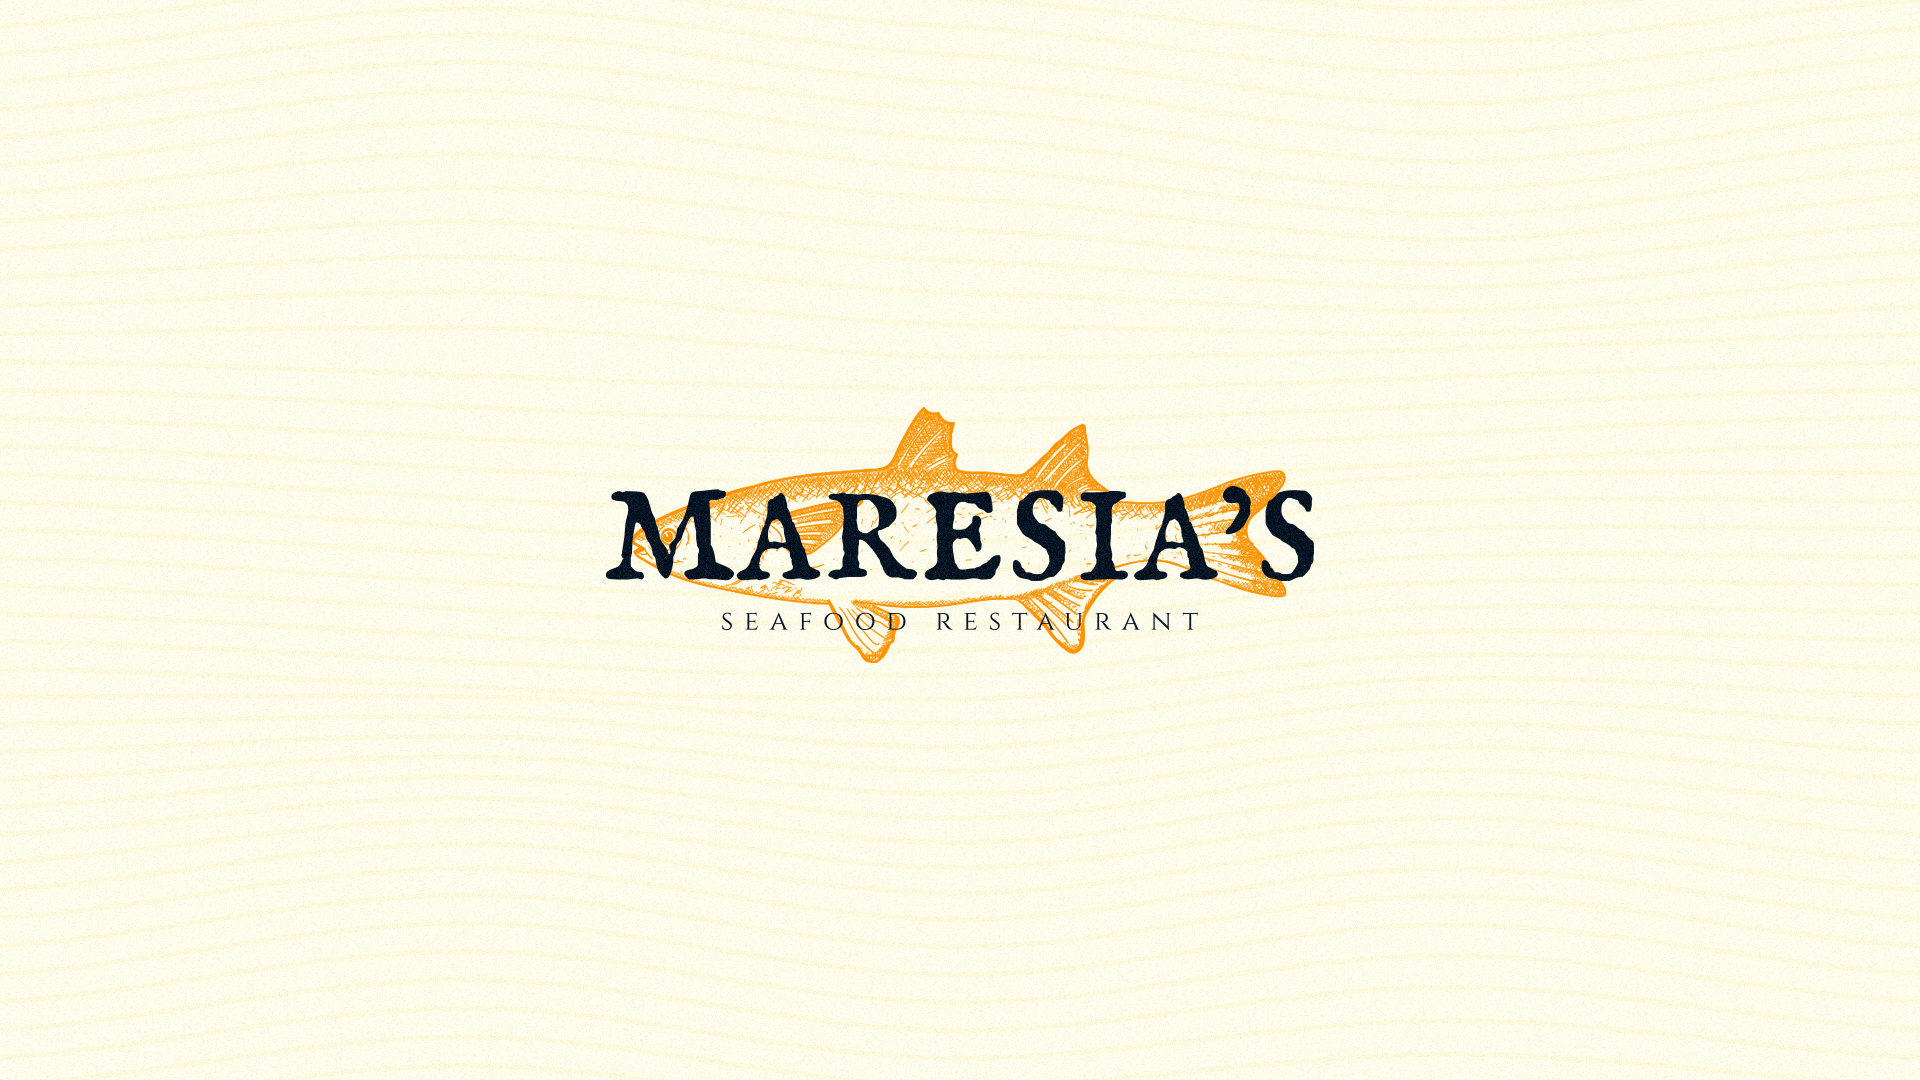 Corporate Brand Identity for Maresia’s Seafood Restaurant by André Santos Design